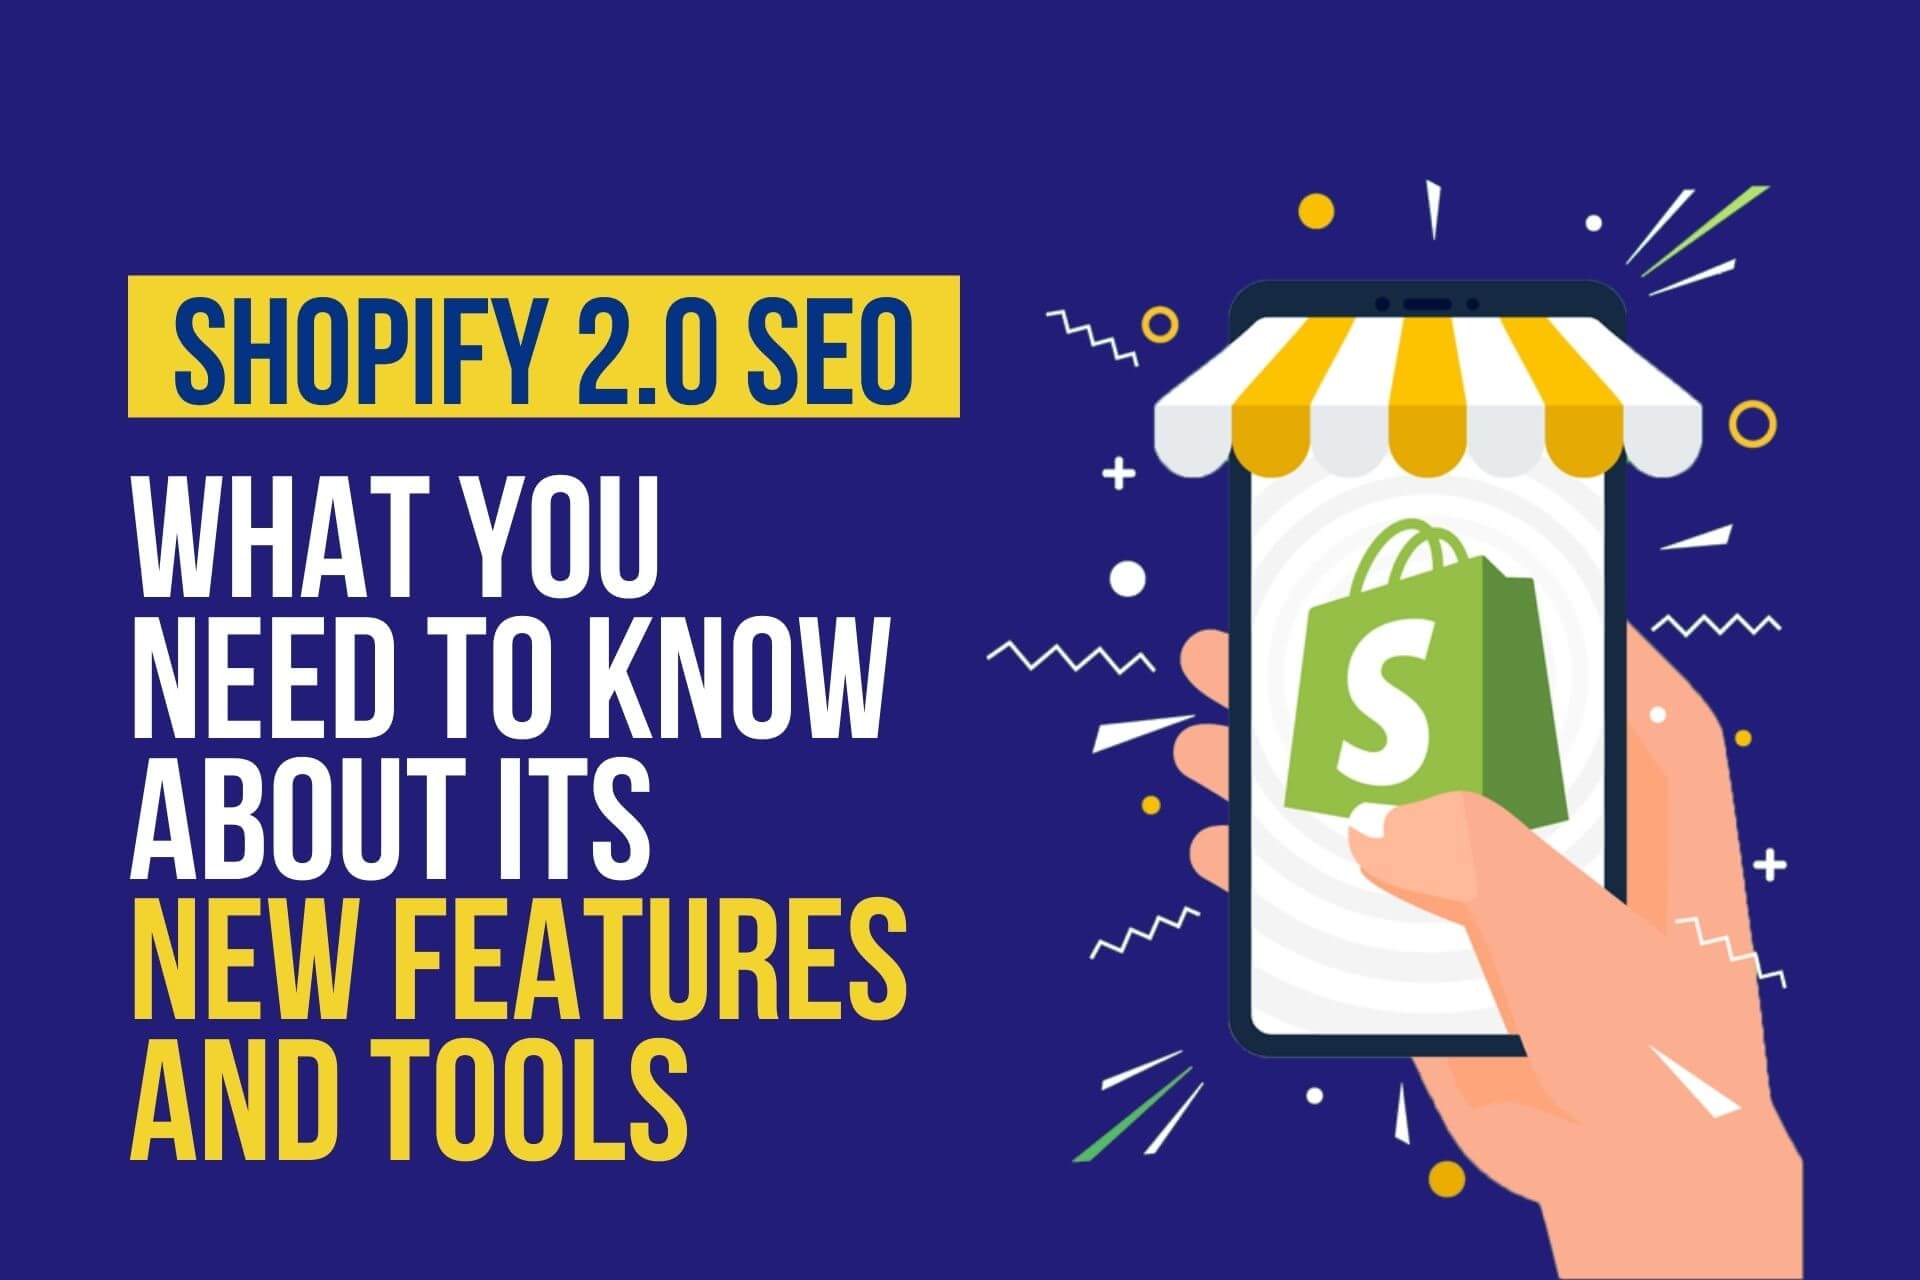 Shopify 2.0 SEO: What You Need to Know About New Features